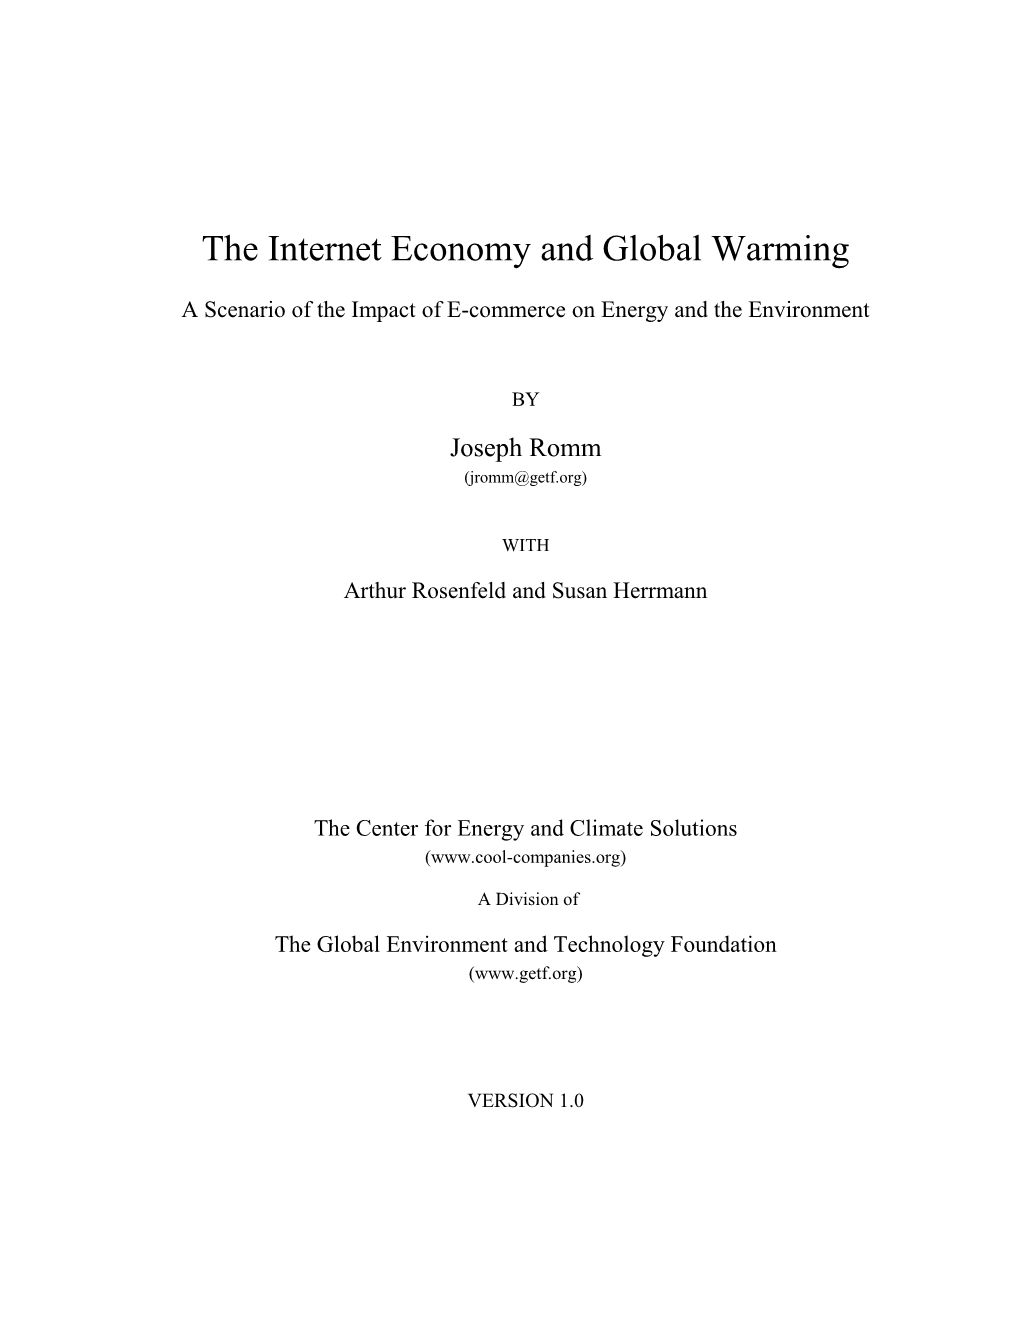 The Internet and Global Warming